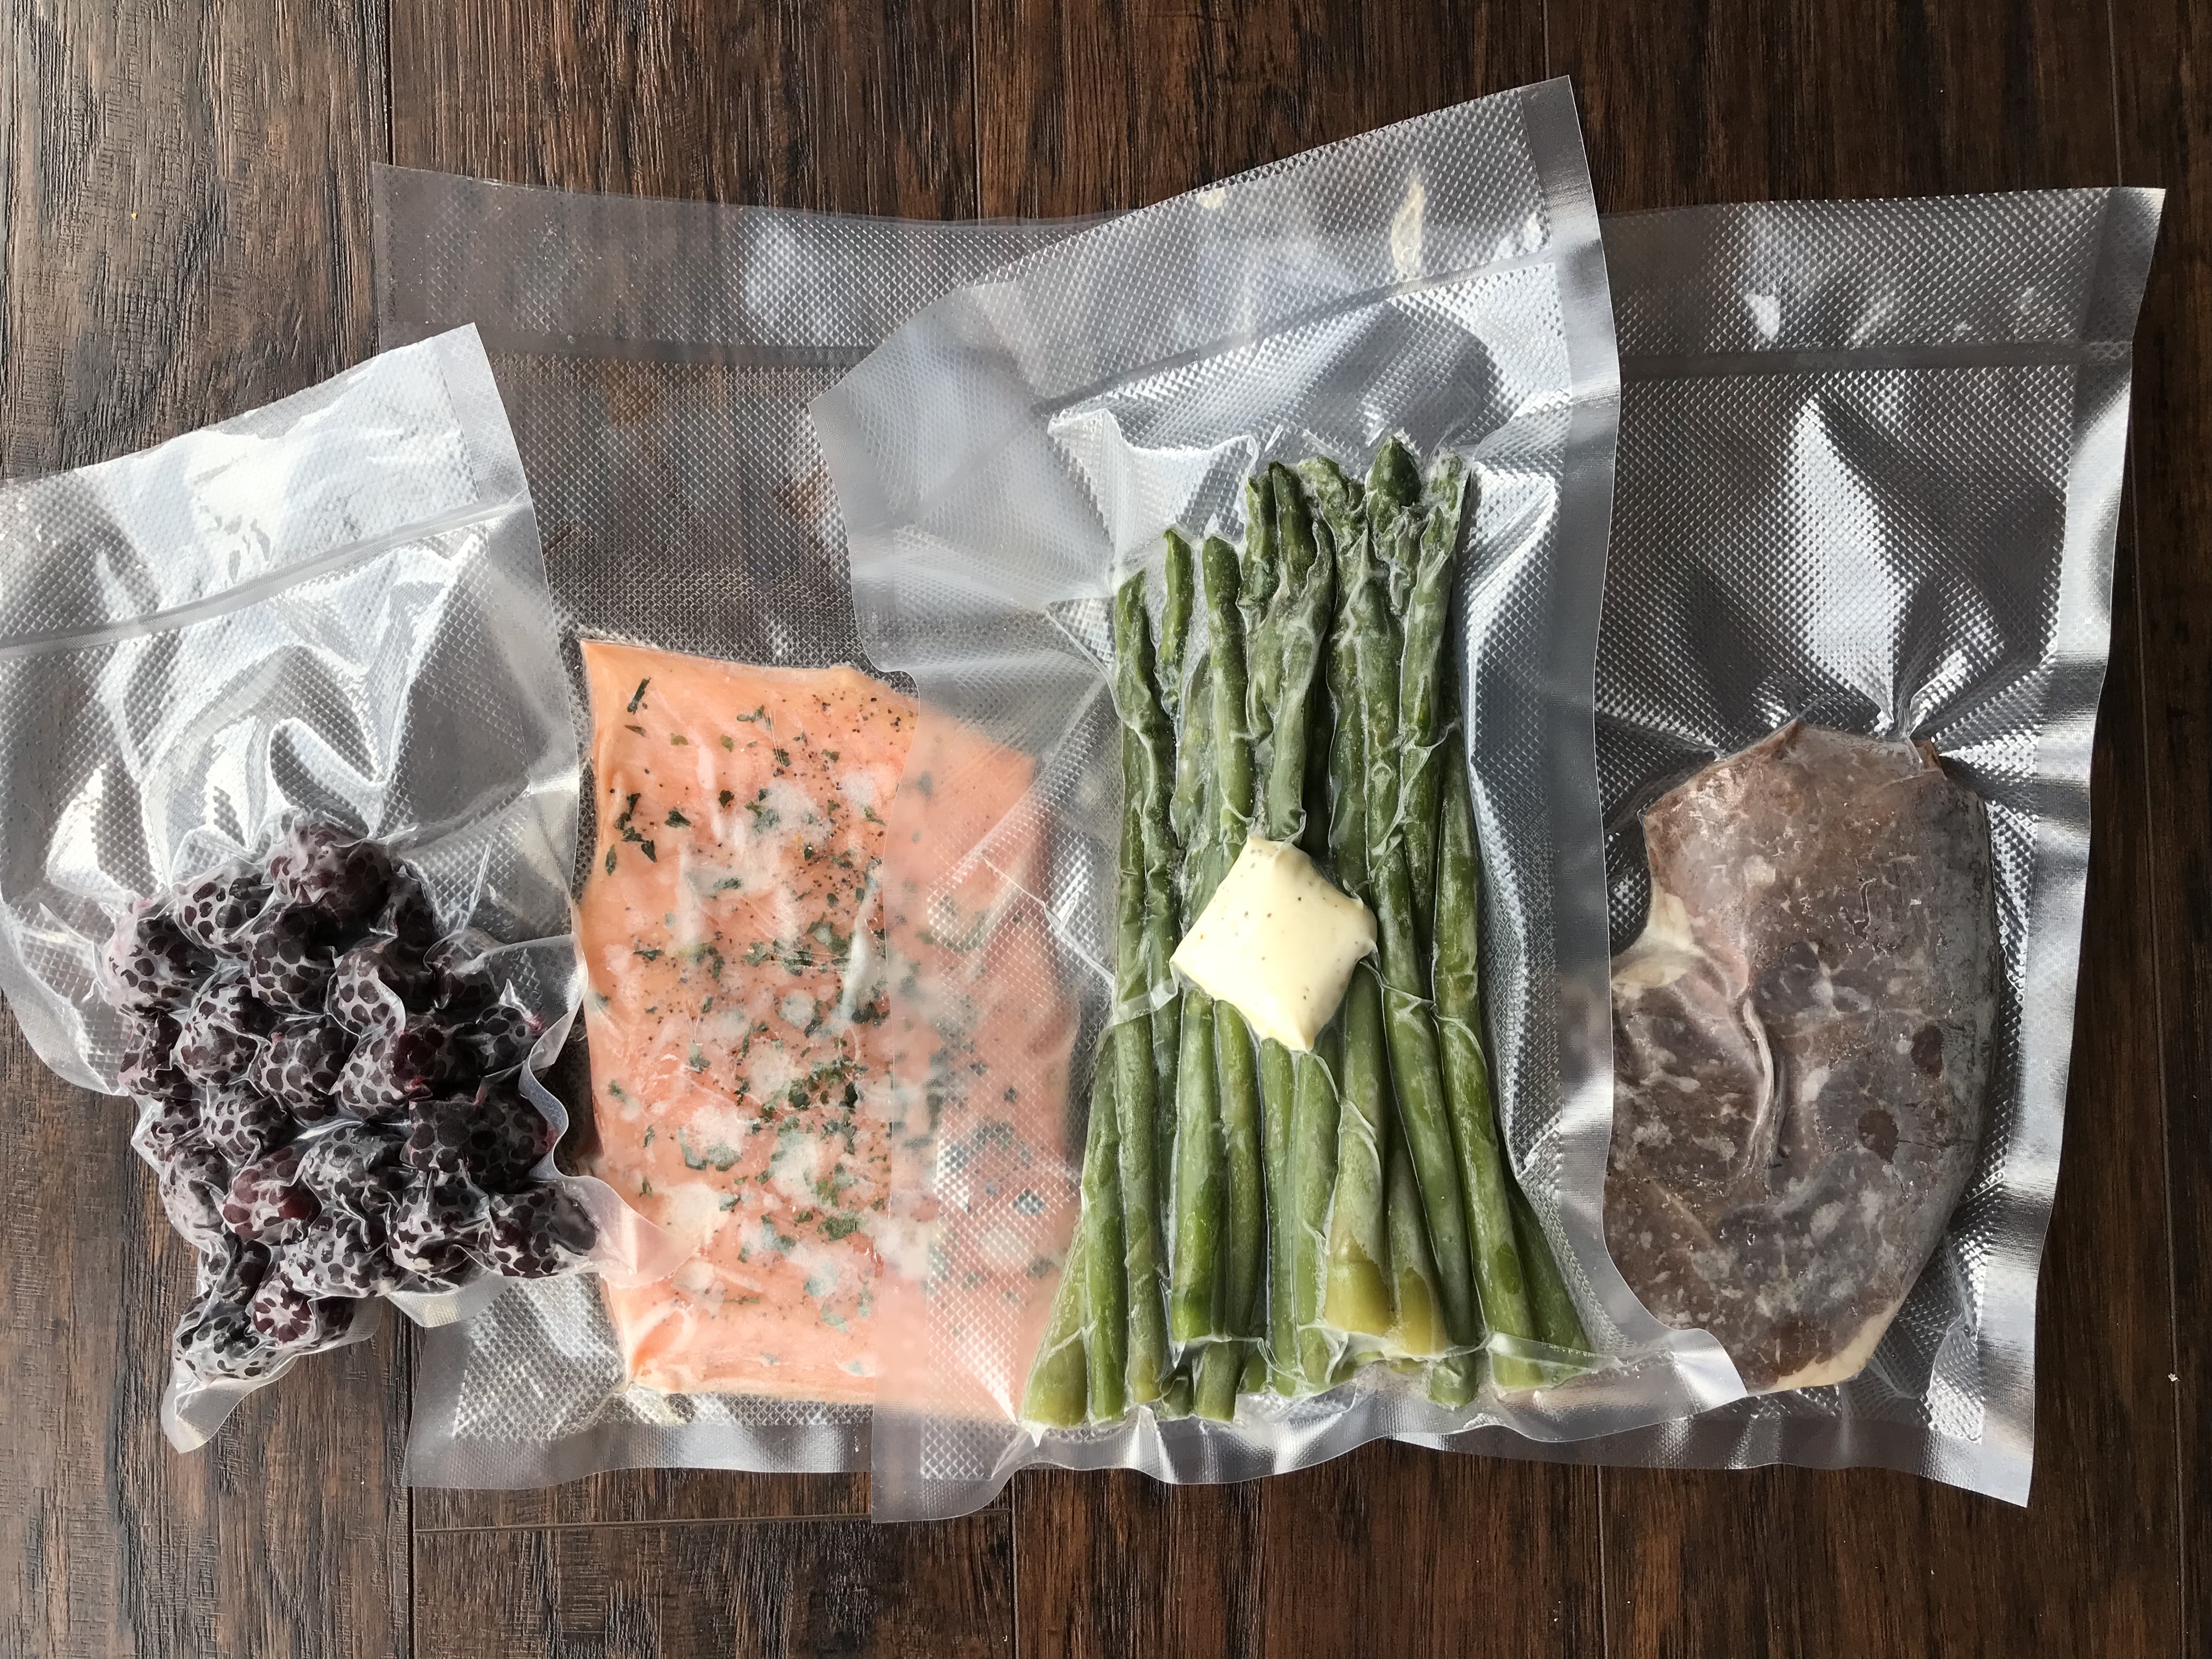 Vacuum sealed food can help keep your freezer organized